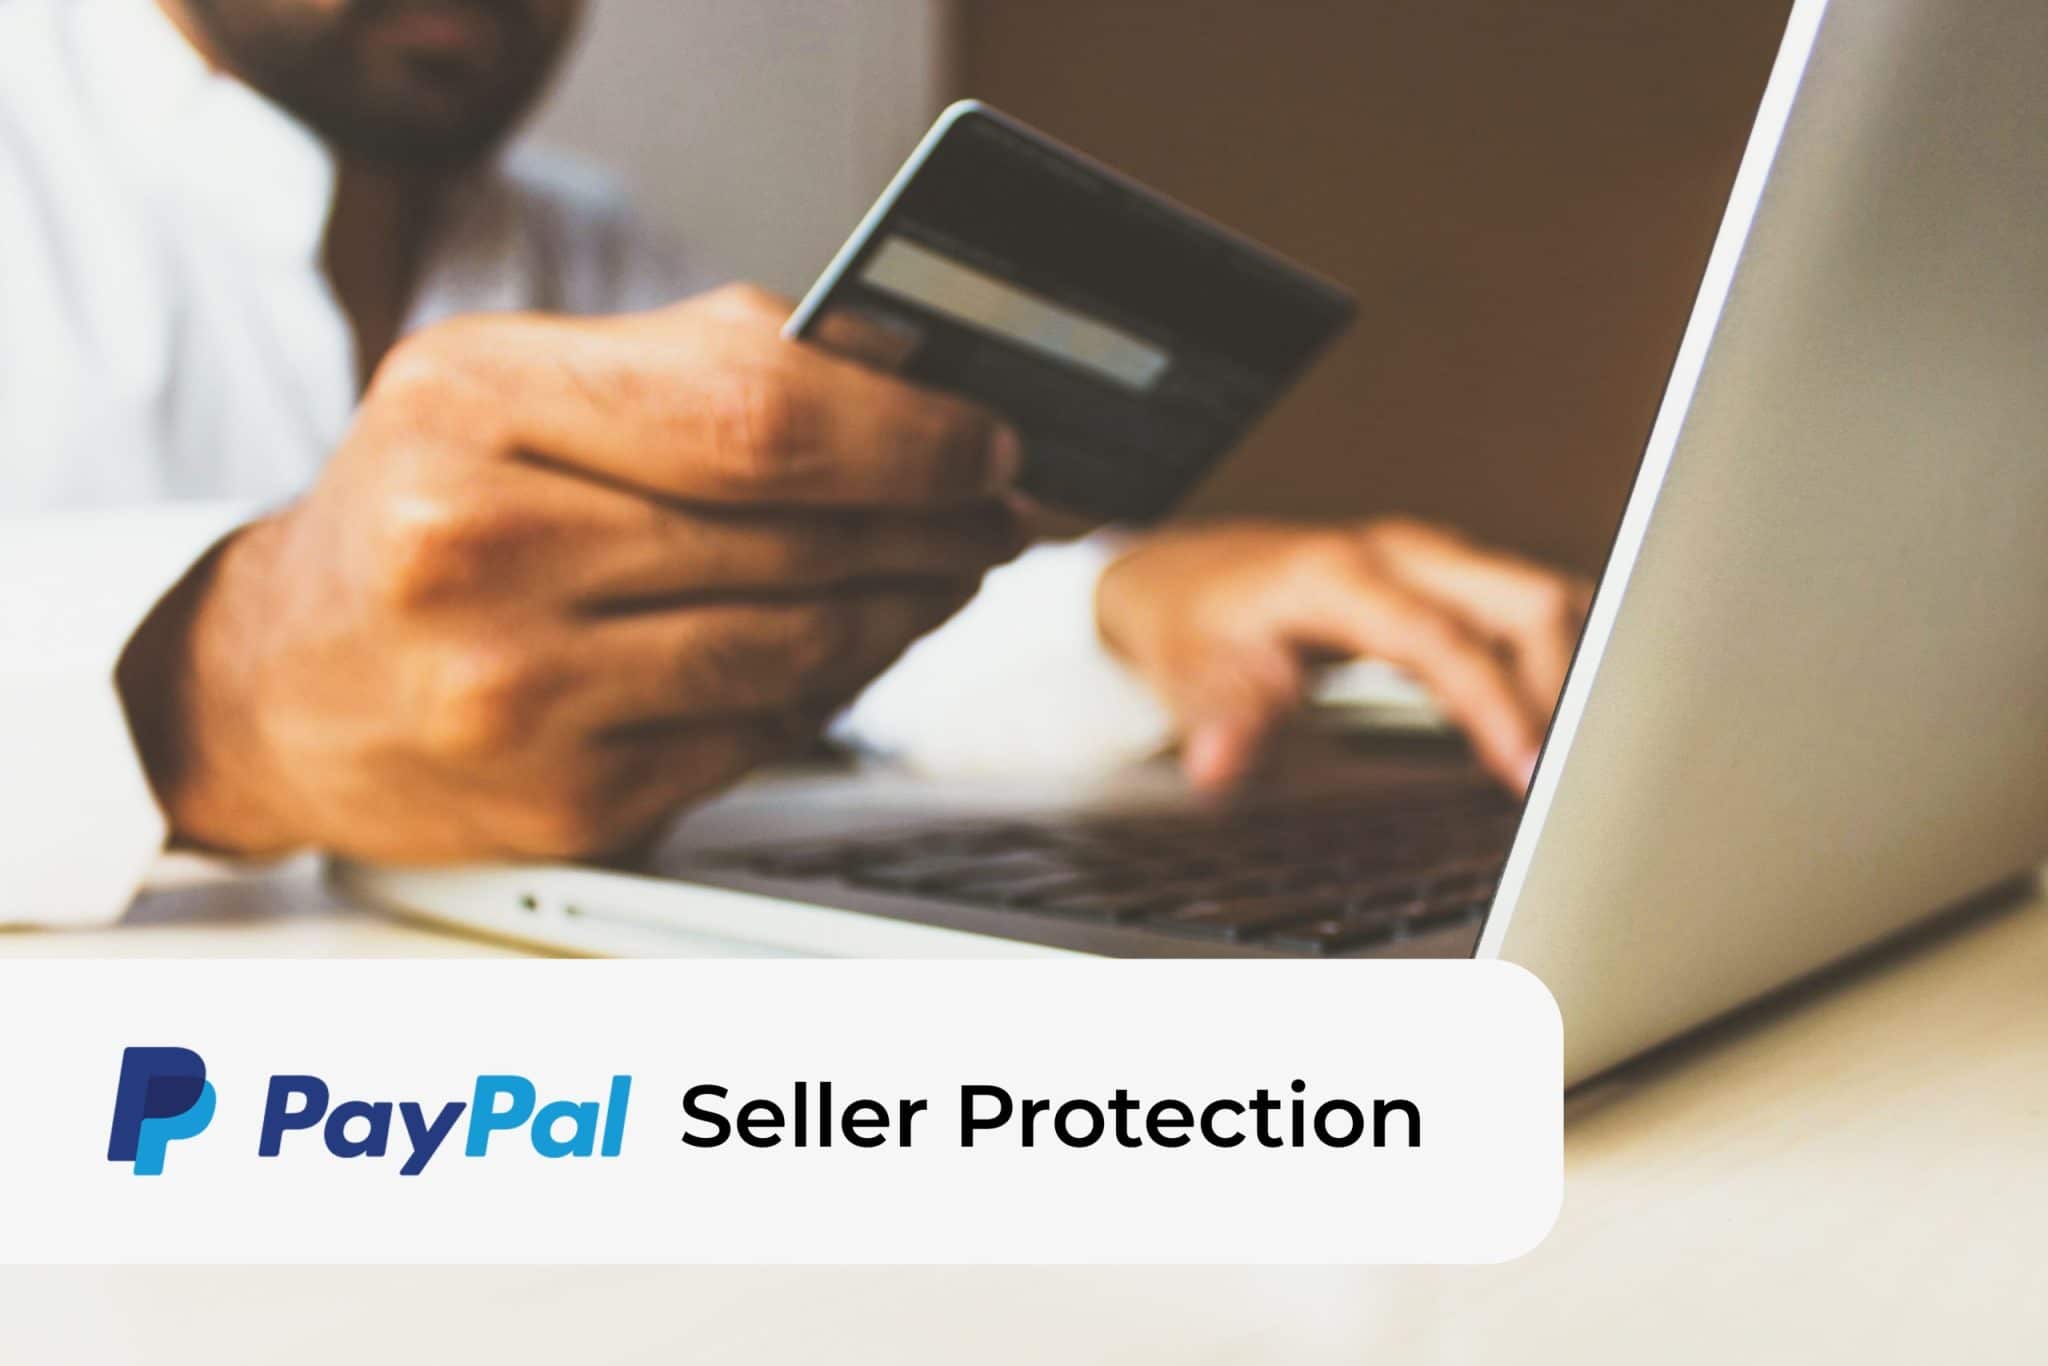 Chargeback protection or seller protection not ava - PayPal Community